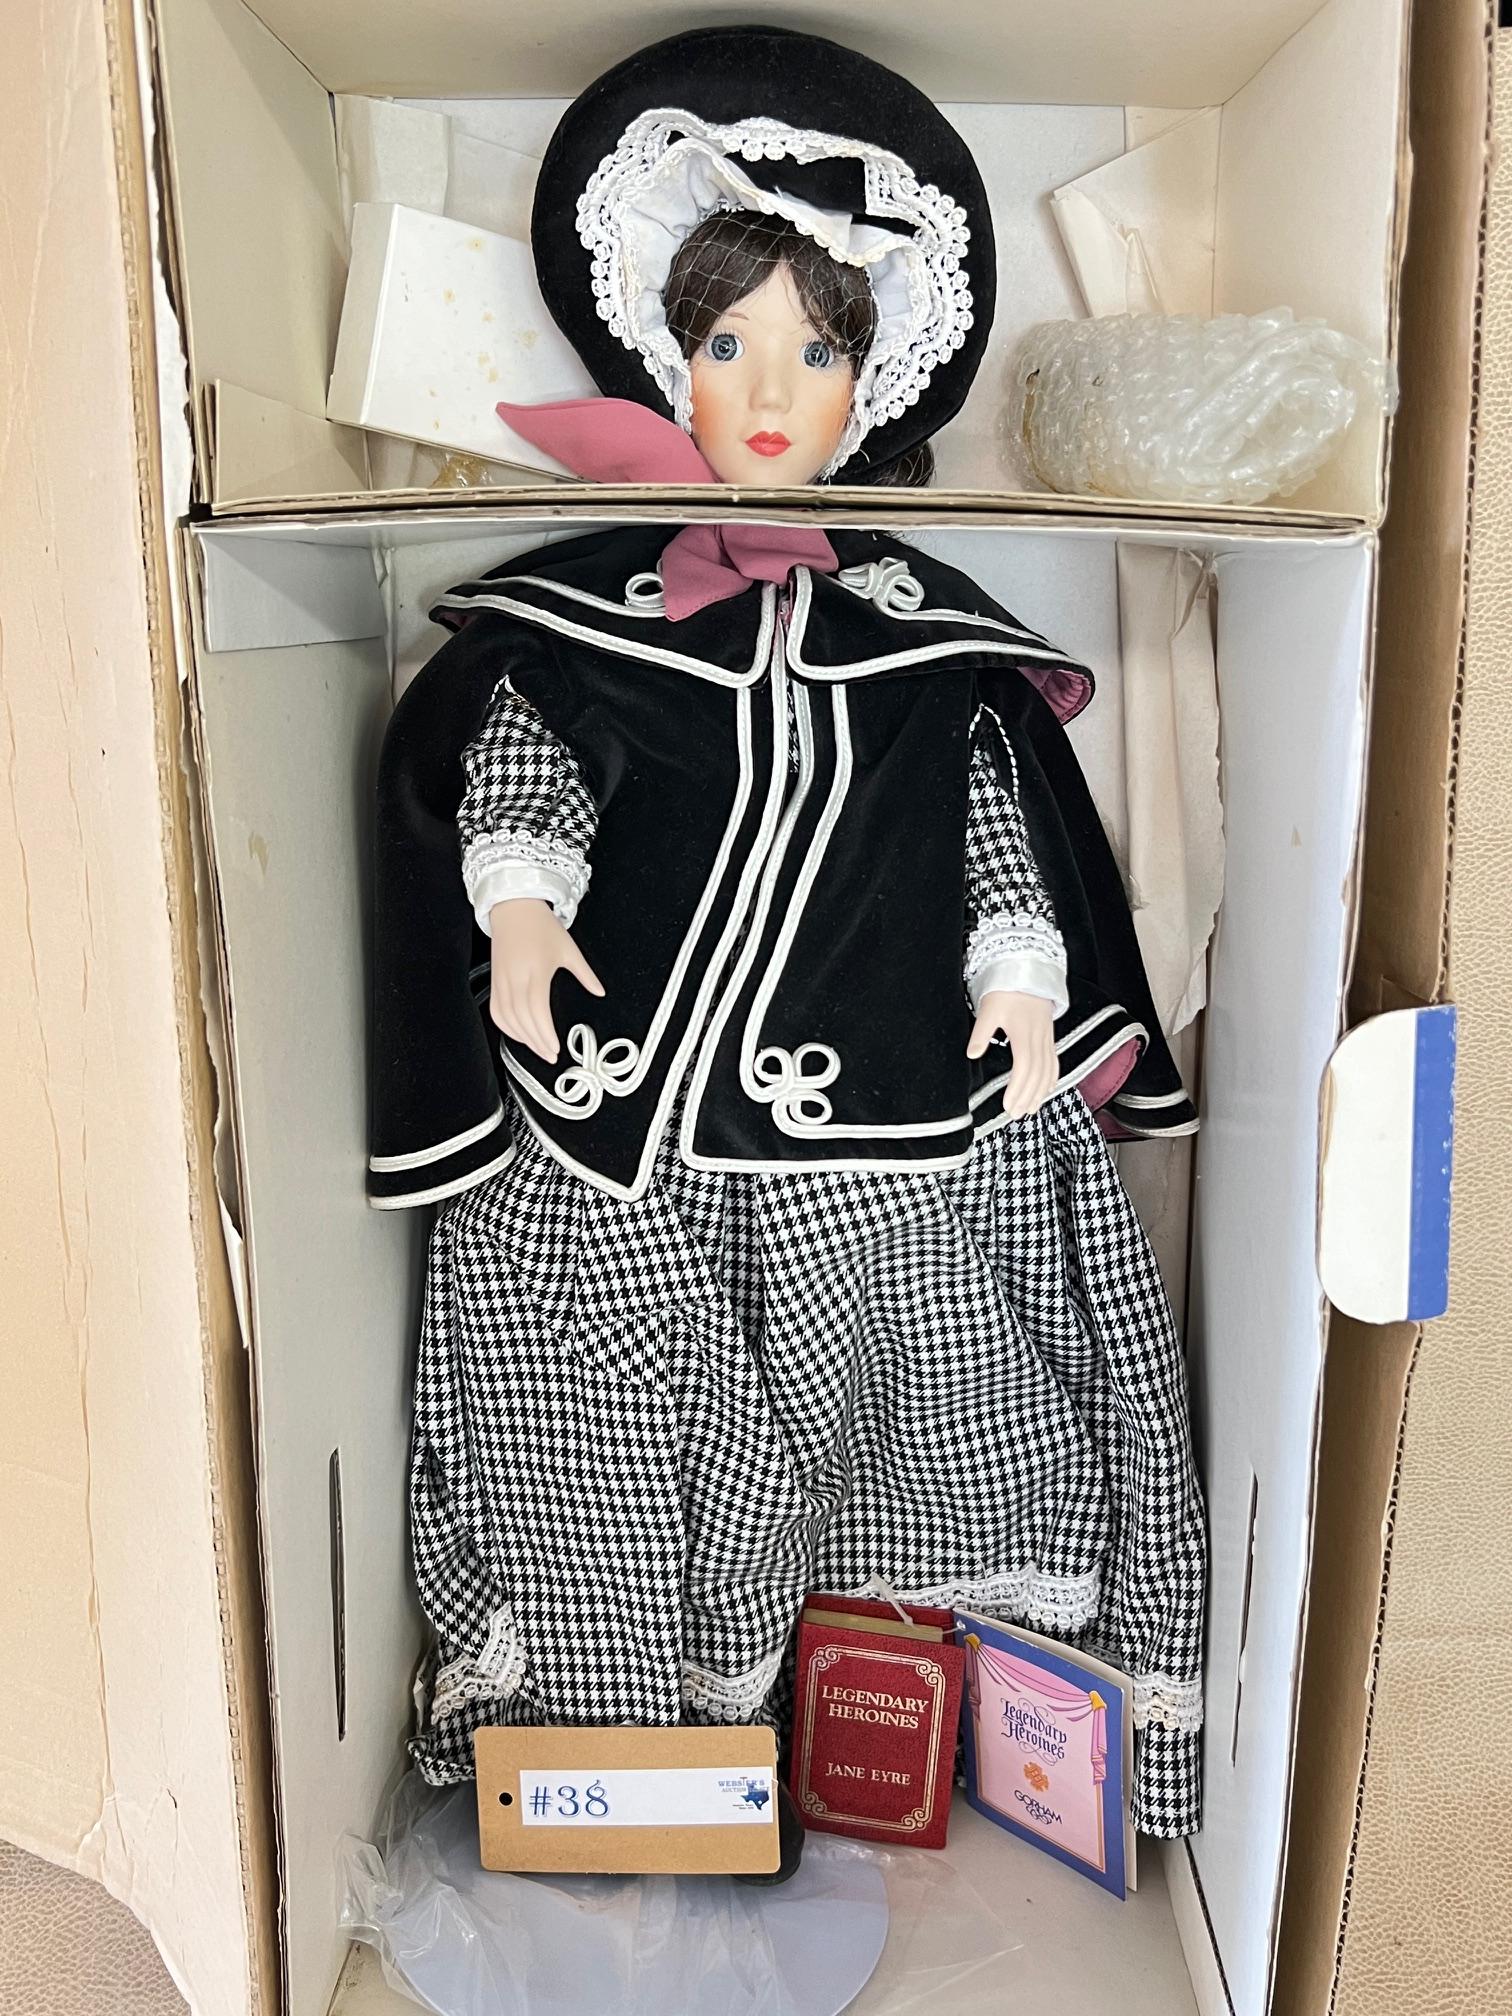 3PC HISTORICAL CHARACTER DOLLS IN BOXES